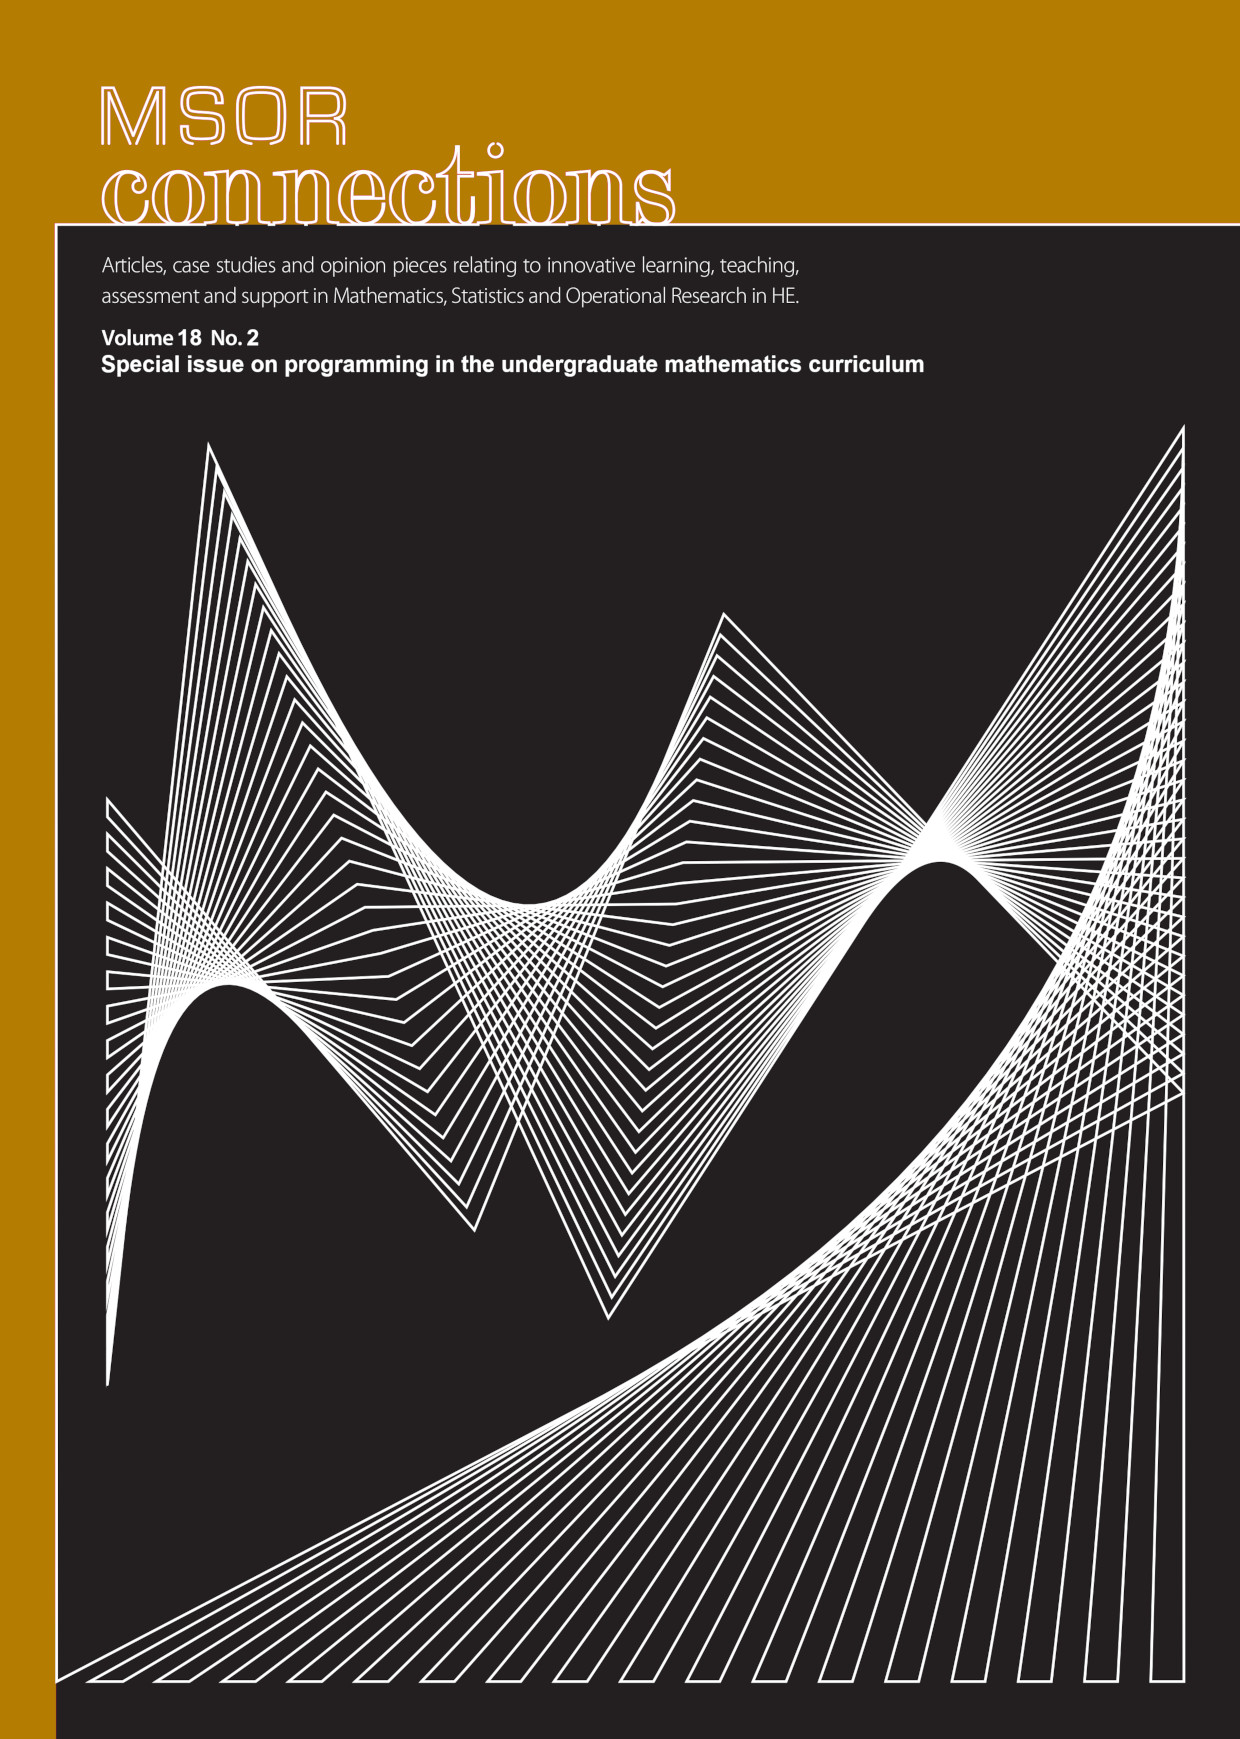 MSOR Connections Volume 18 Issue 2 Special issue on programming in the undergraduate mathematics curriculum